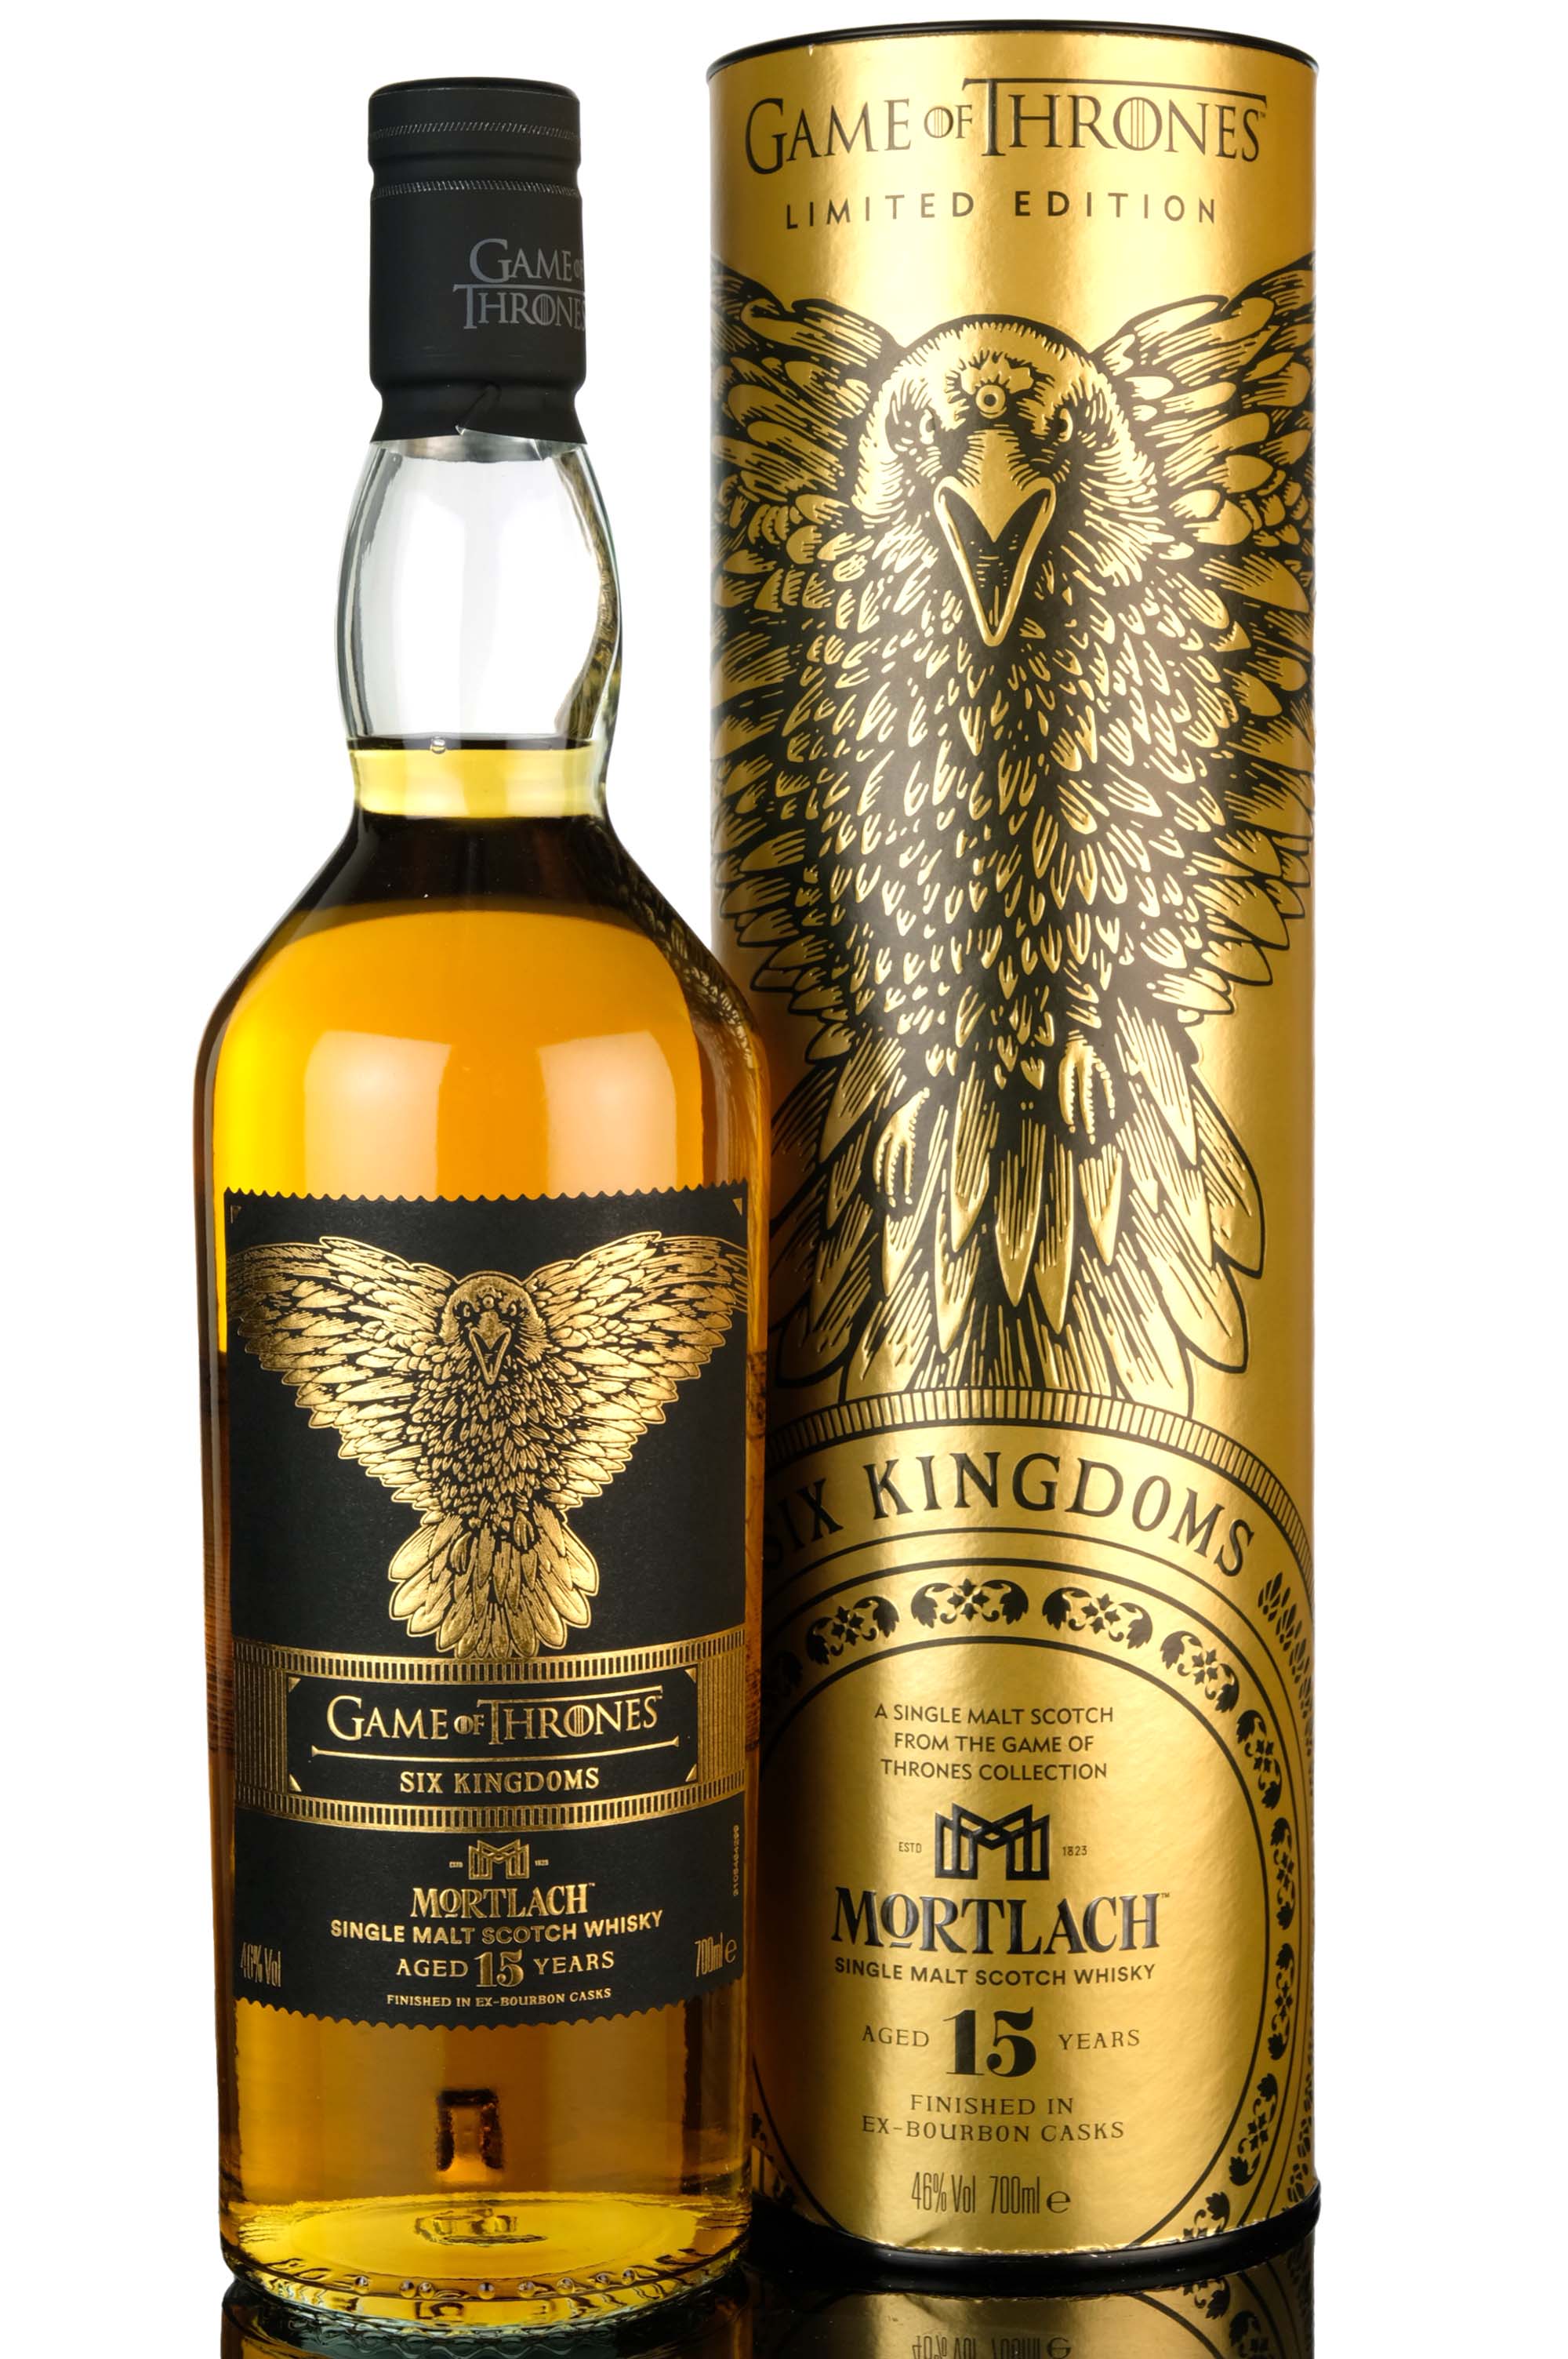 Mortlach 15 Year Old - Six Kingdoms Game of Thrones